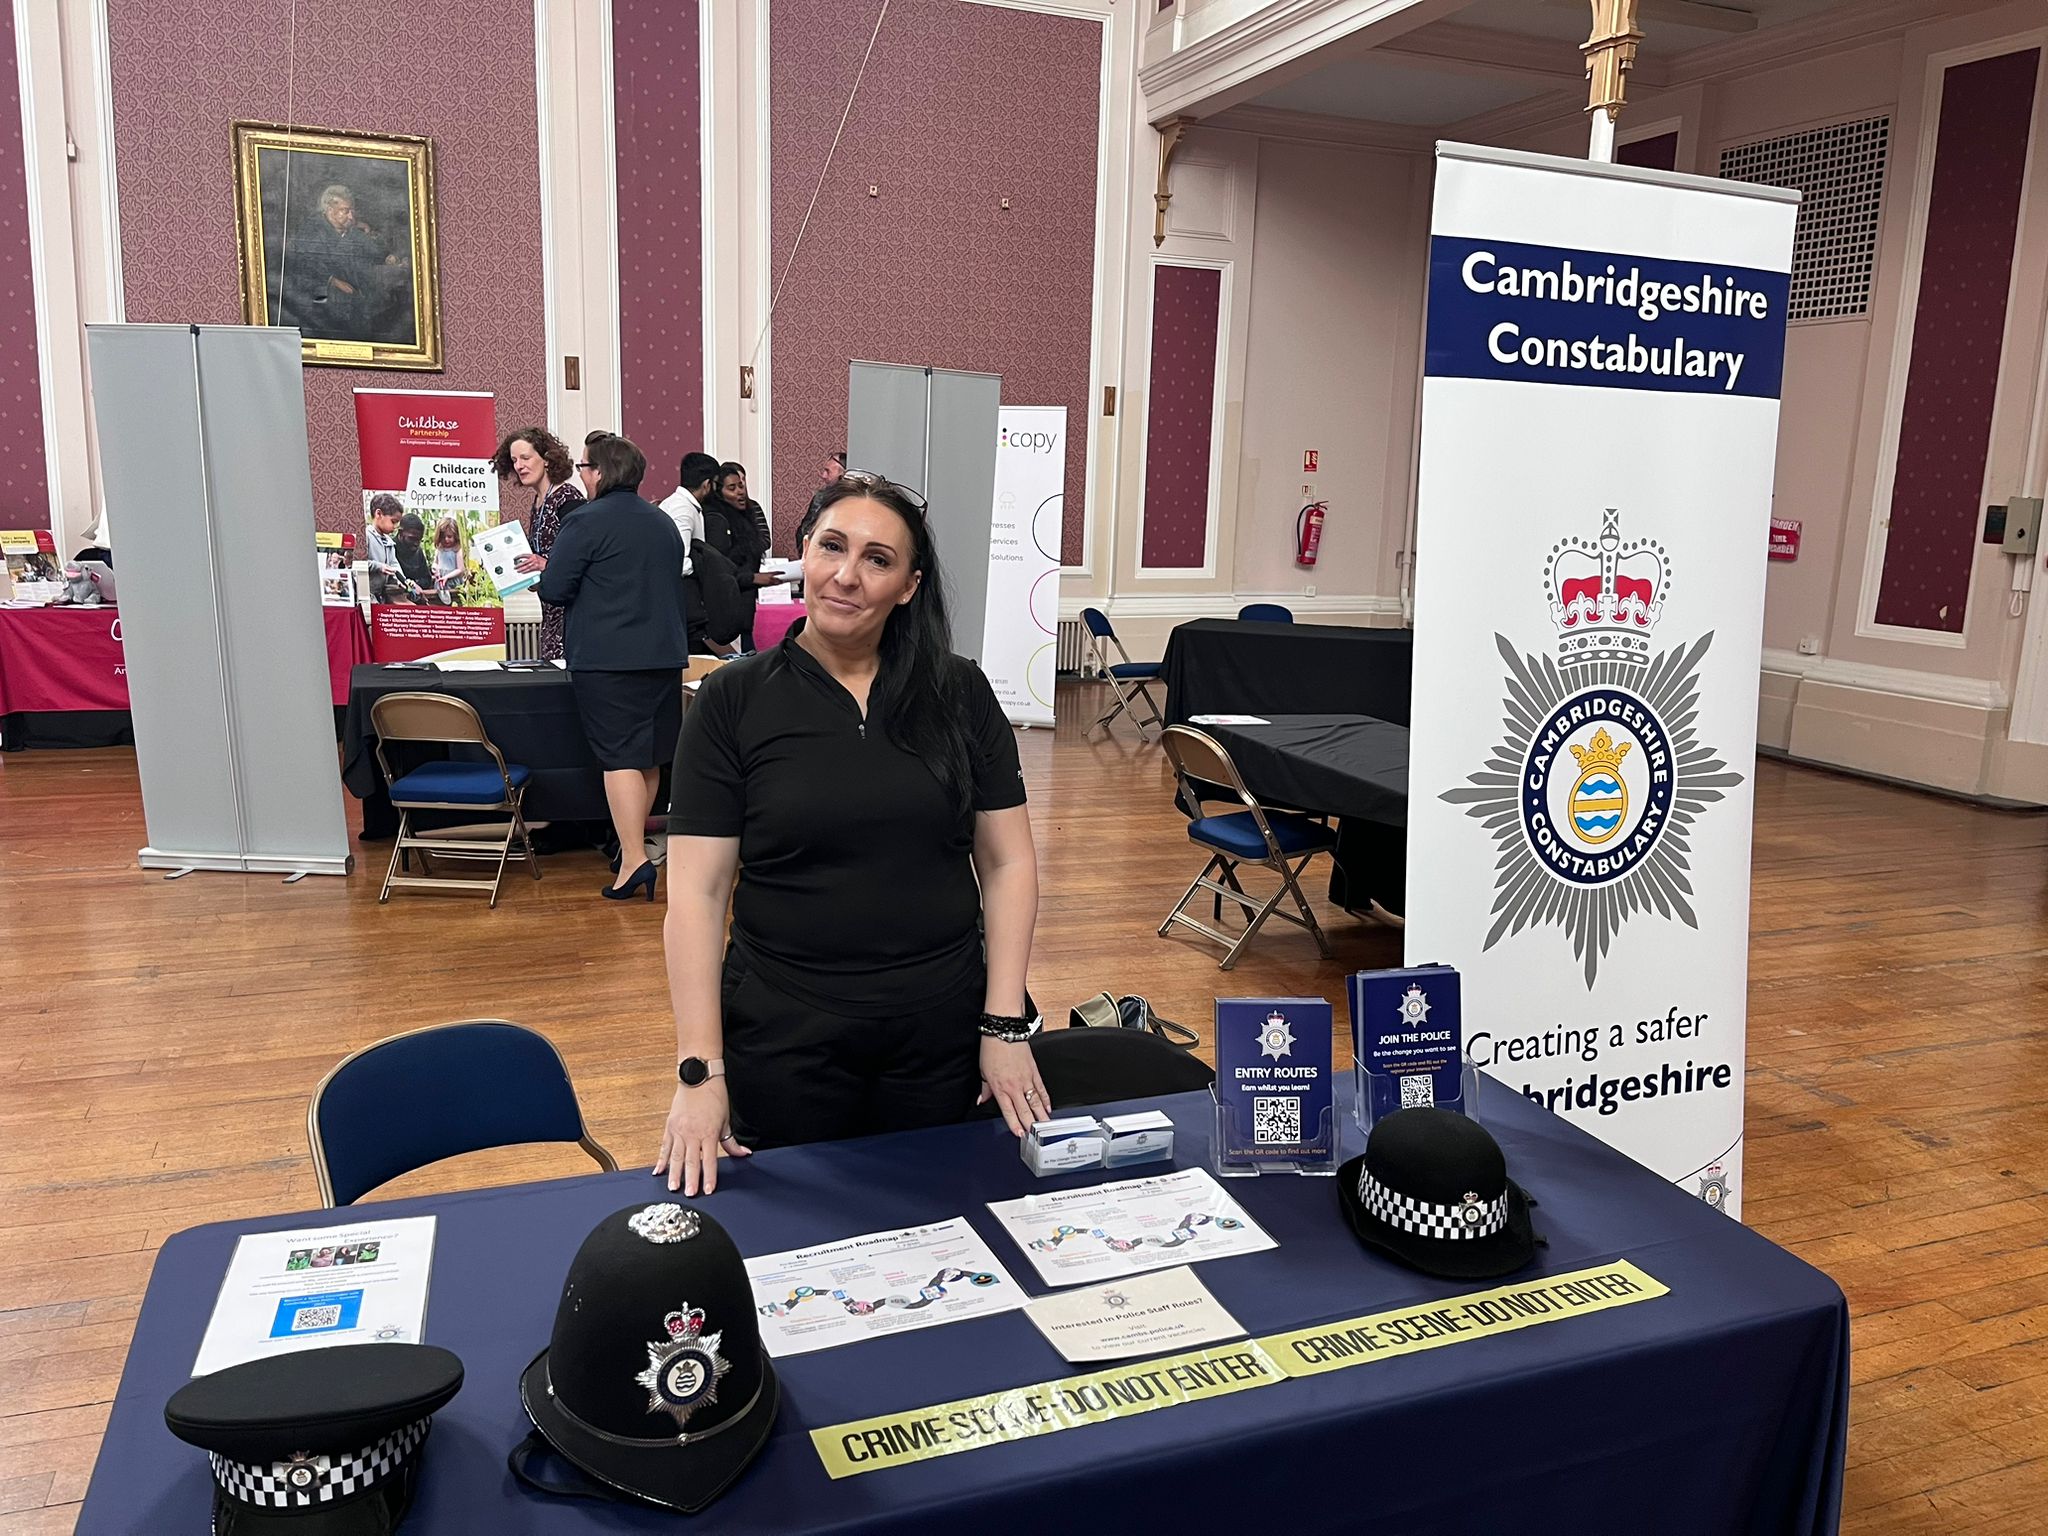 Cambridgeshire Constabulary at our event in Cambridge